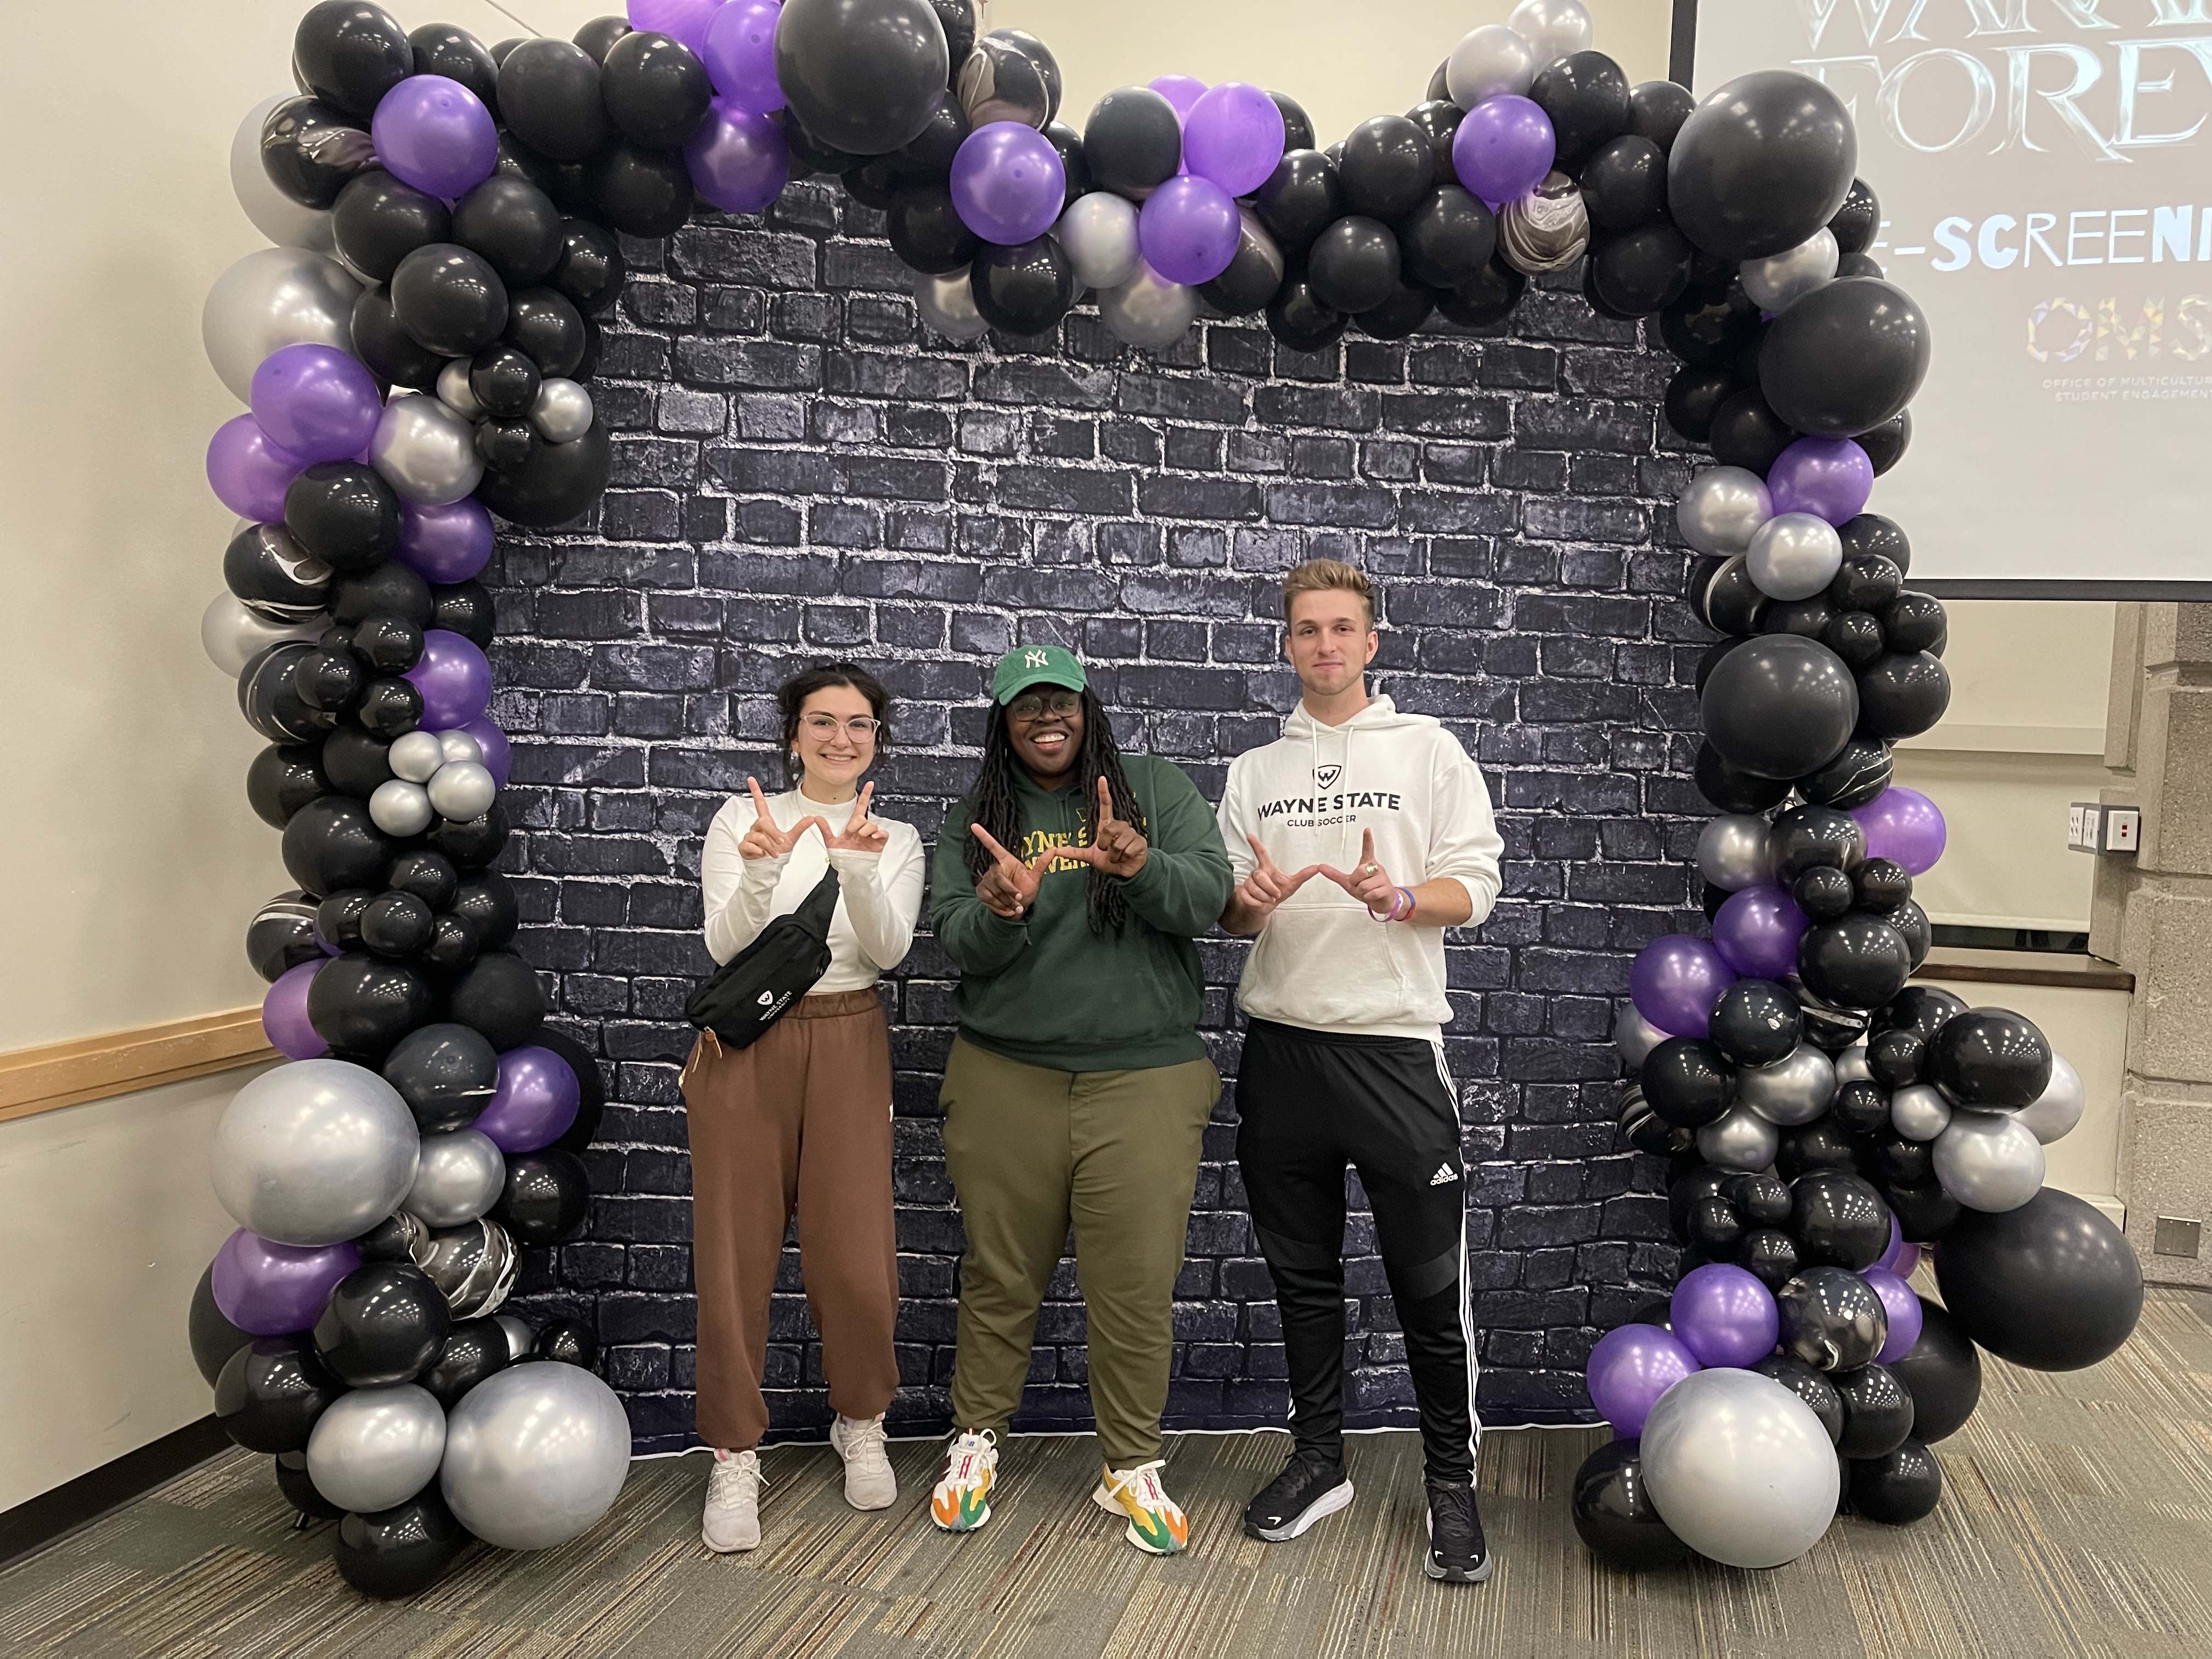 Students and director standing under a ballon arch